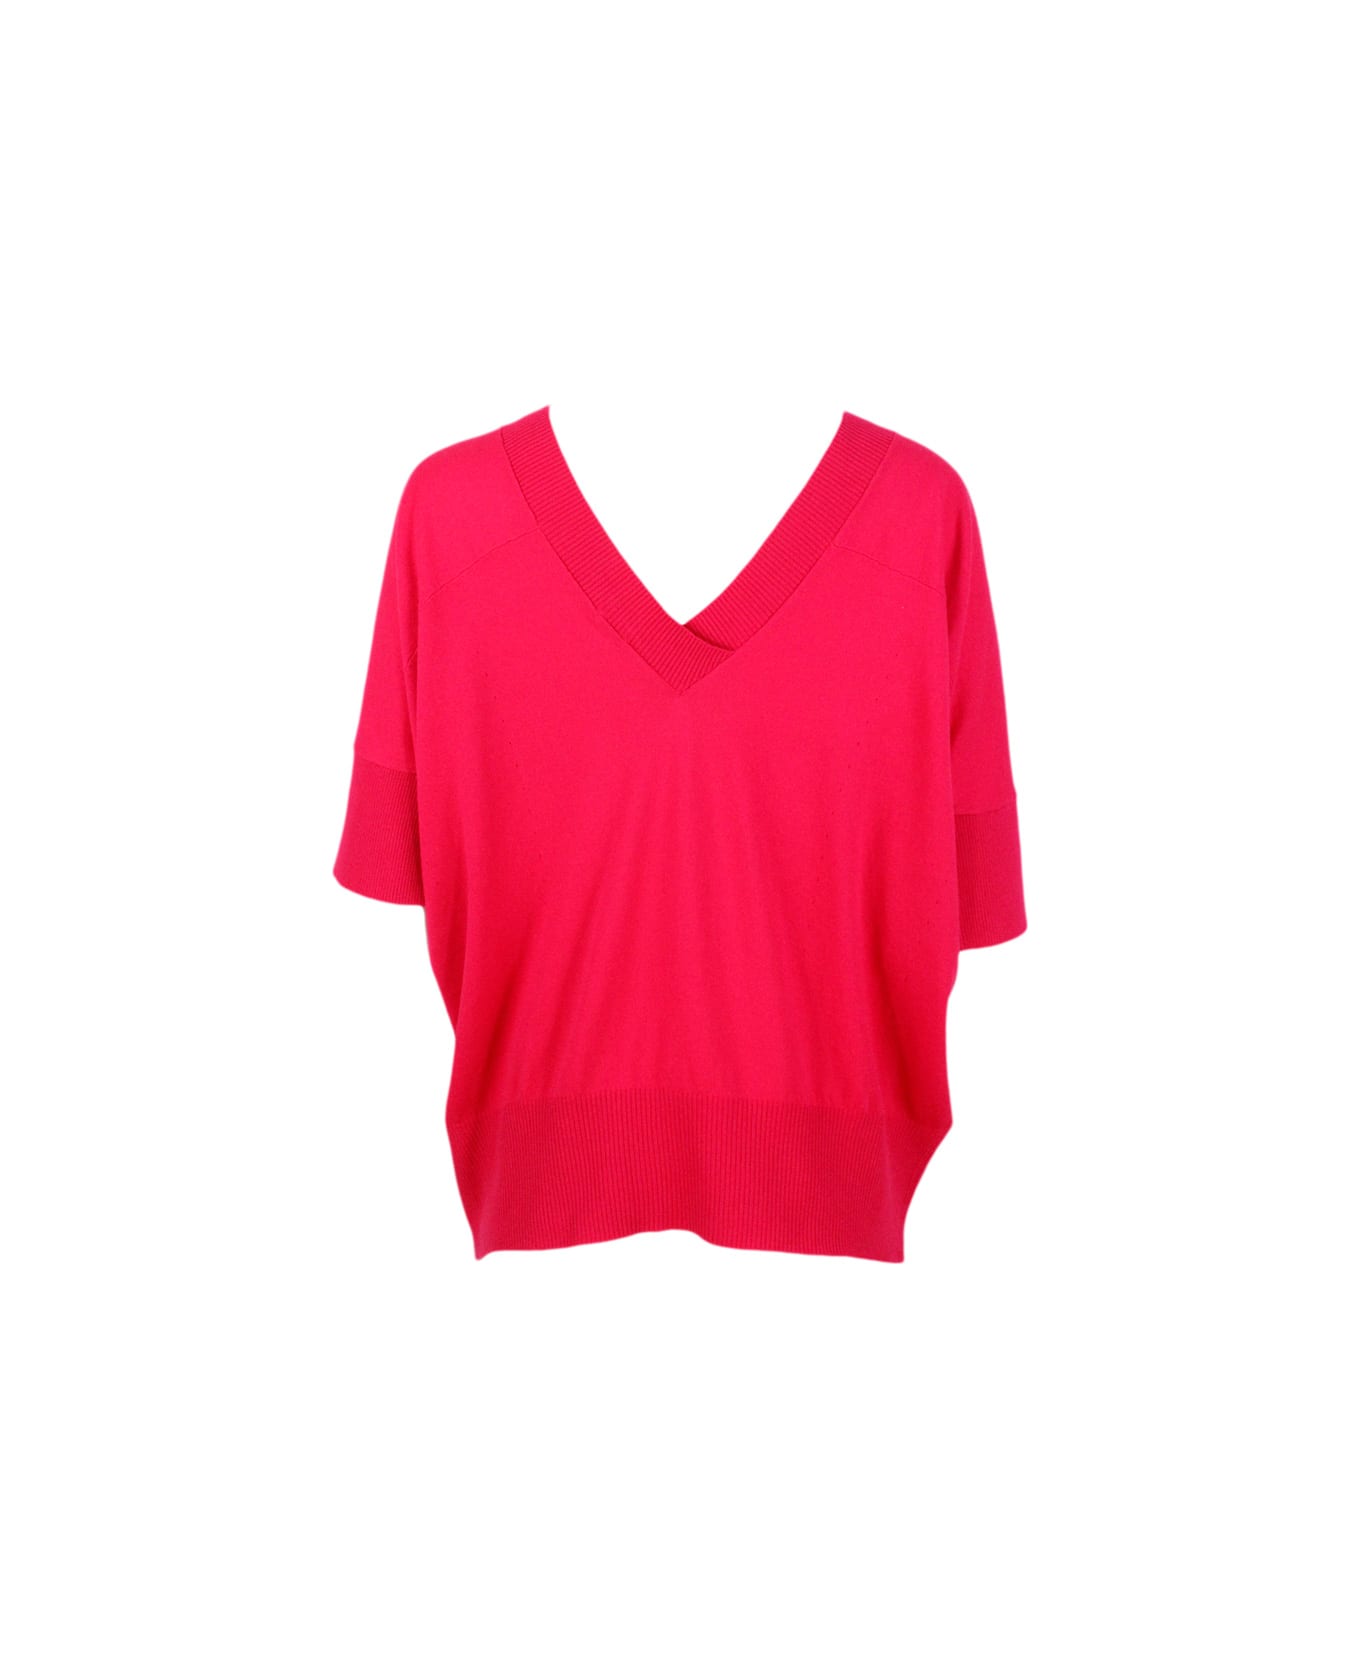 Malo Light Oversized Sweater In 100% Fine Cotton With Short Sleeve V-neck - Cherry